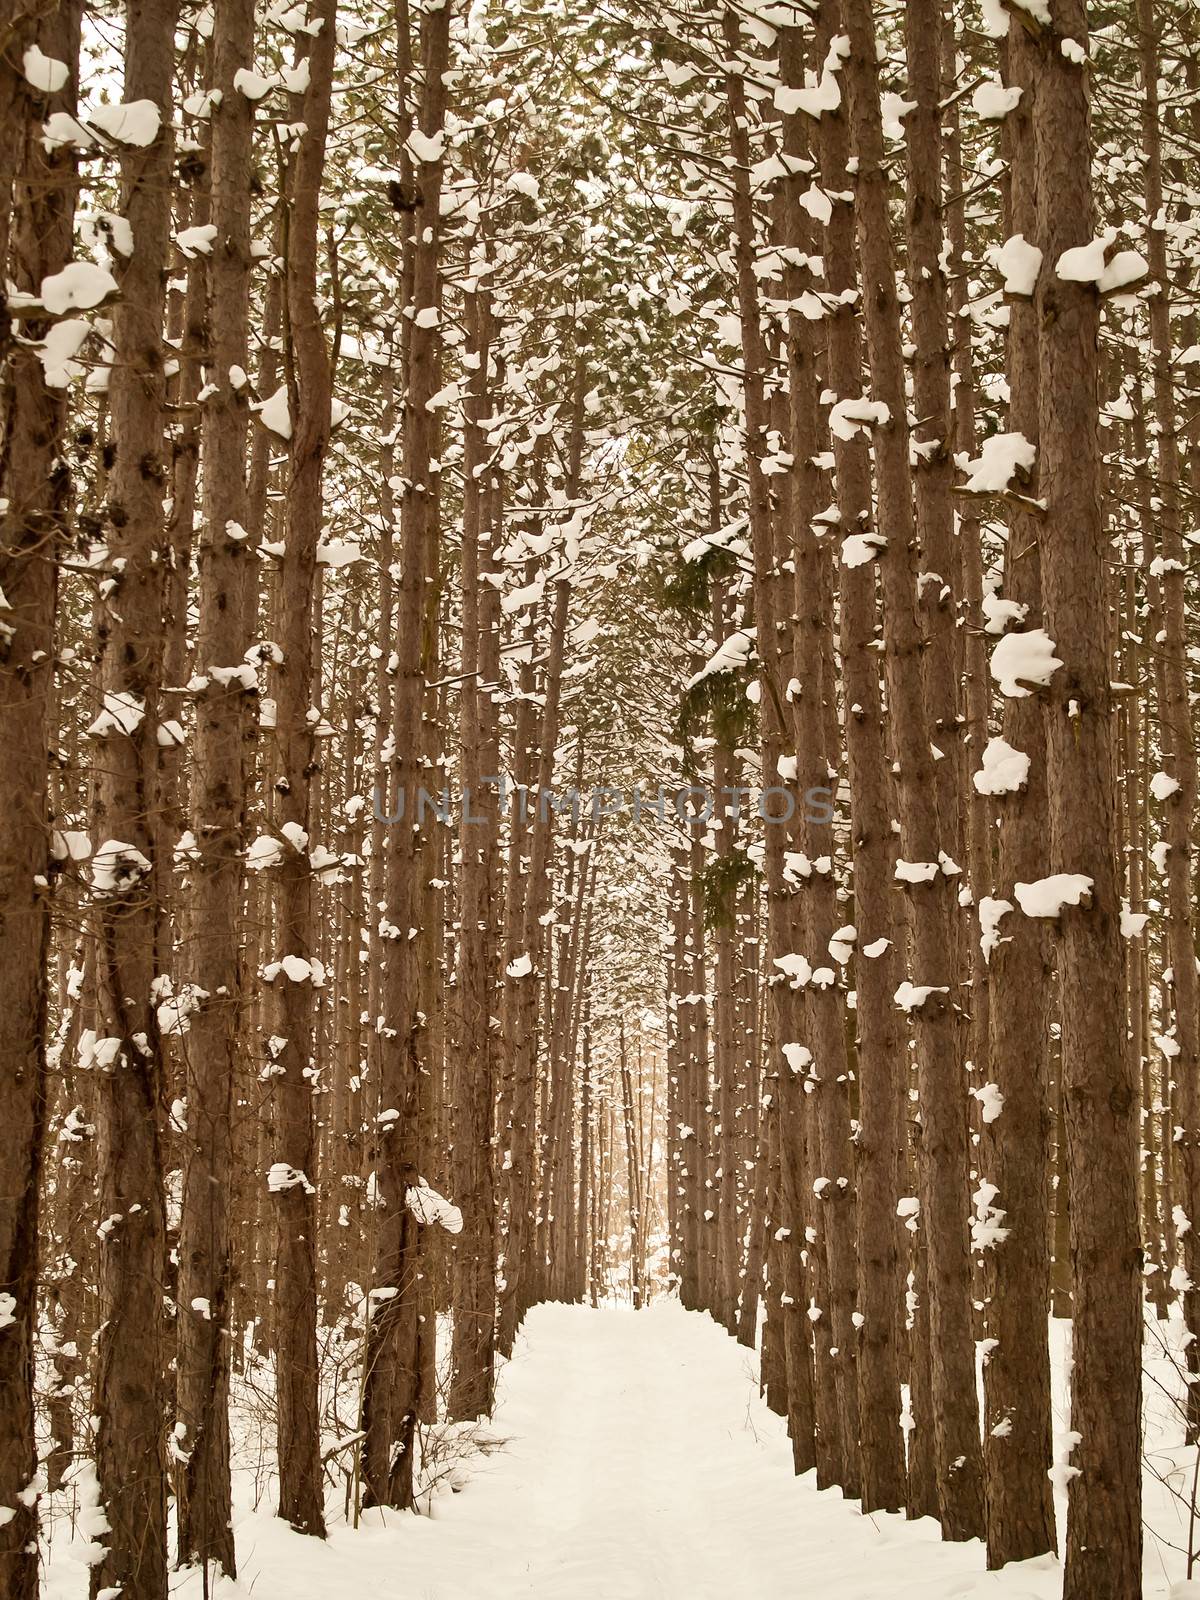 hiking trail lined by white pine trees in winter